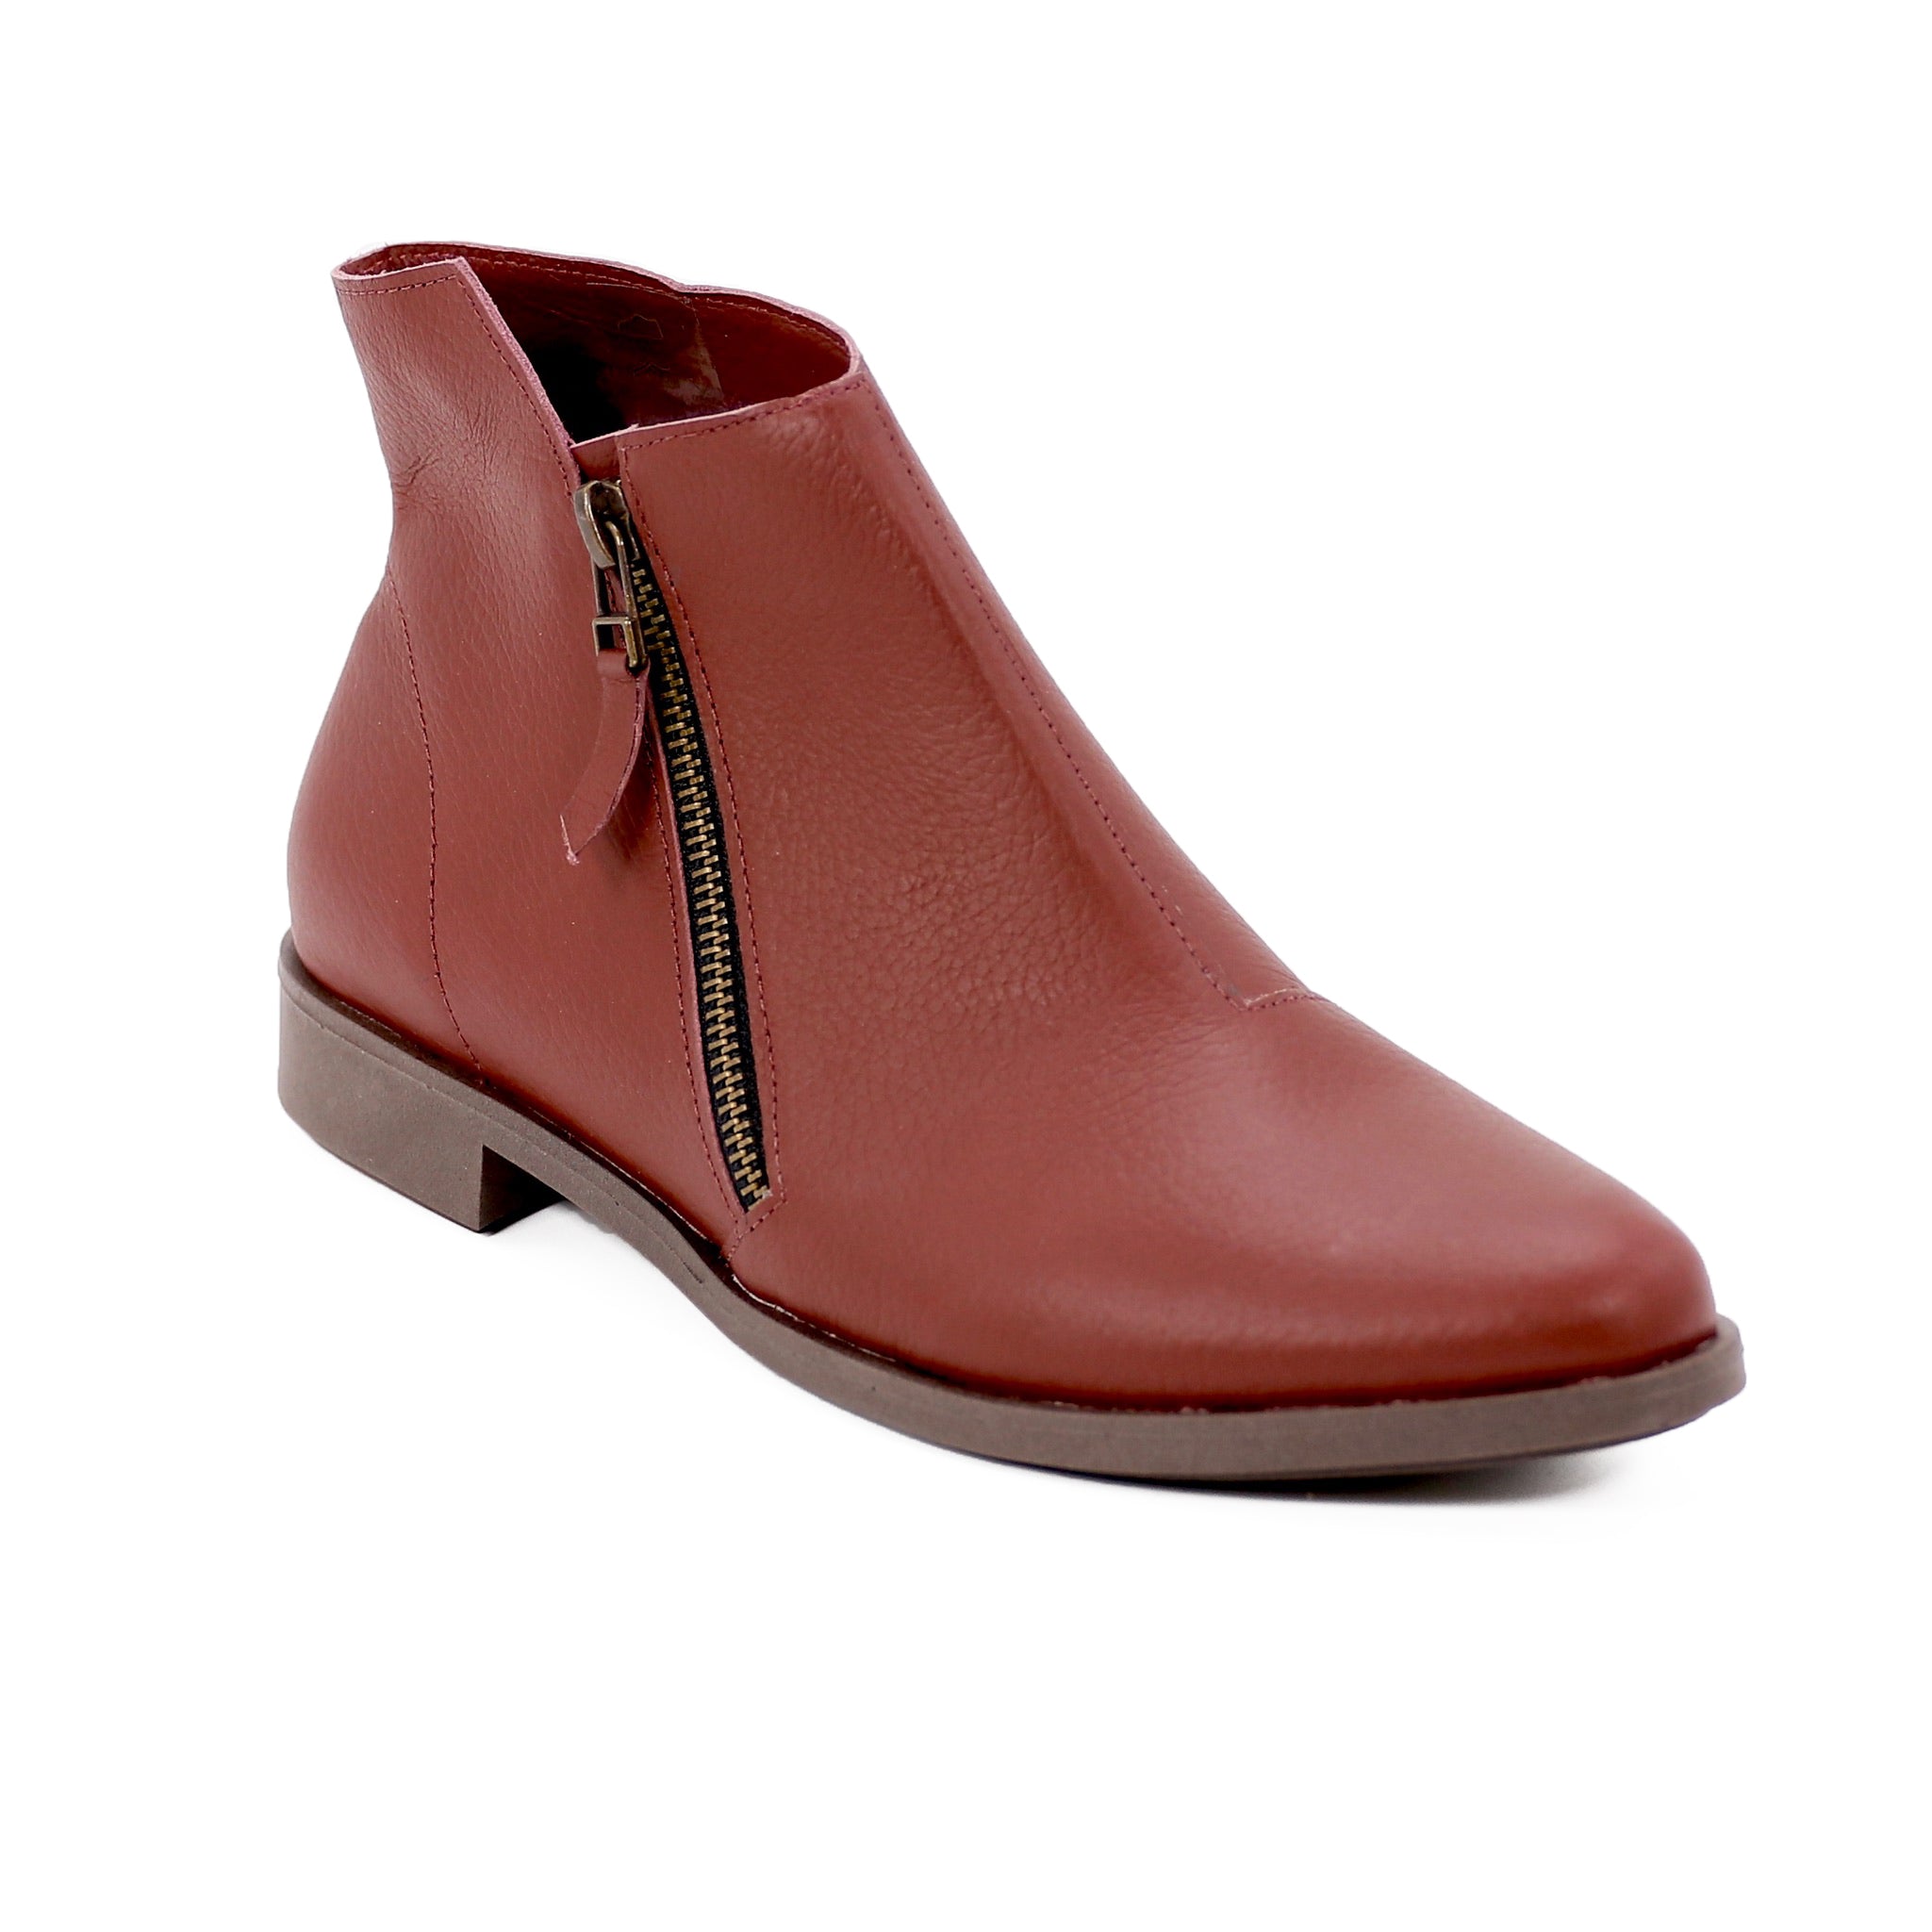 women's red ankle booties